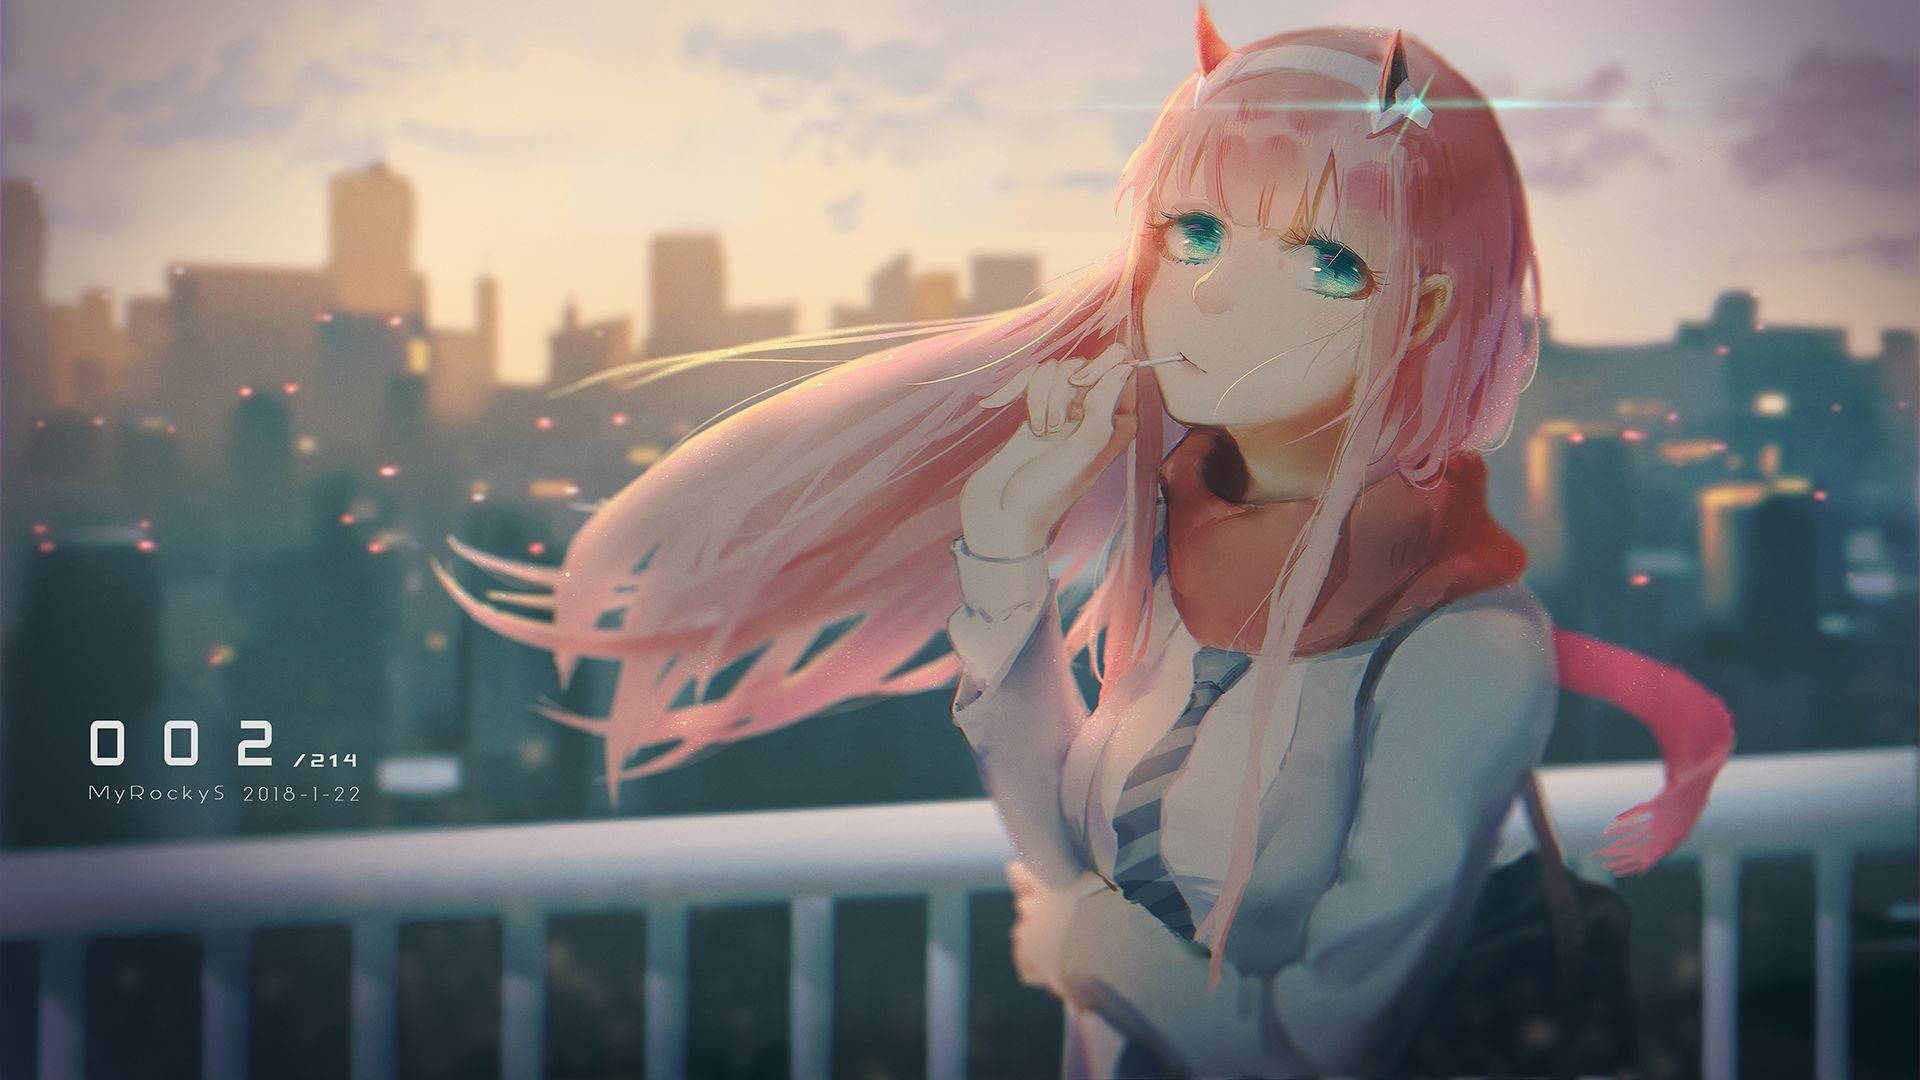 Set in the city, Zero Two is ready to take on the world. Wallpaper